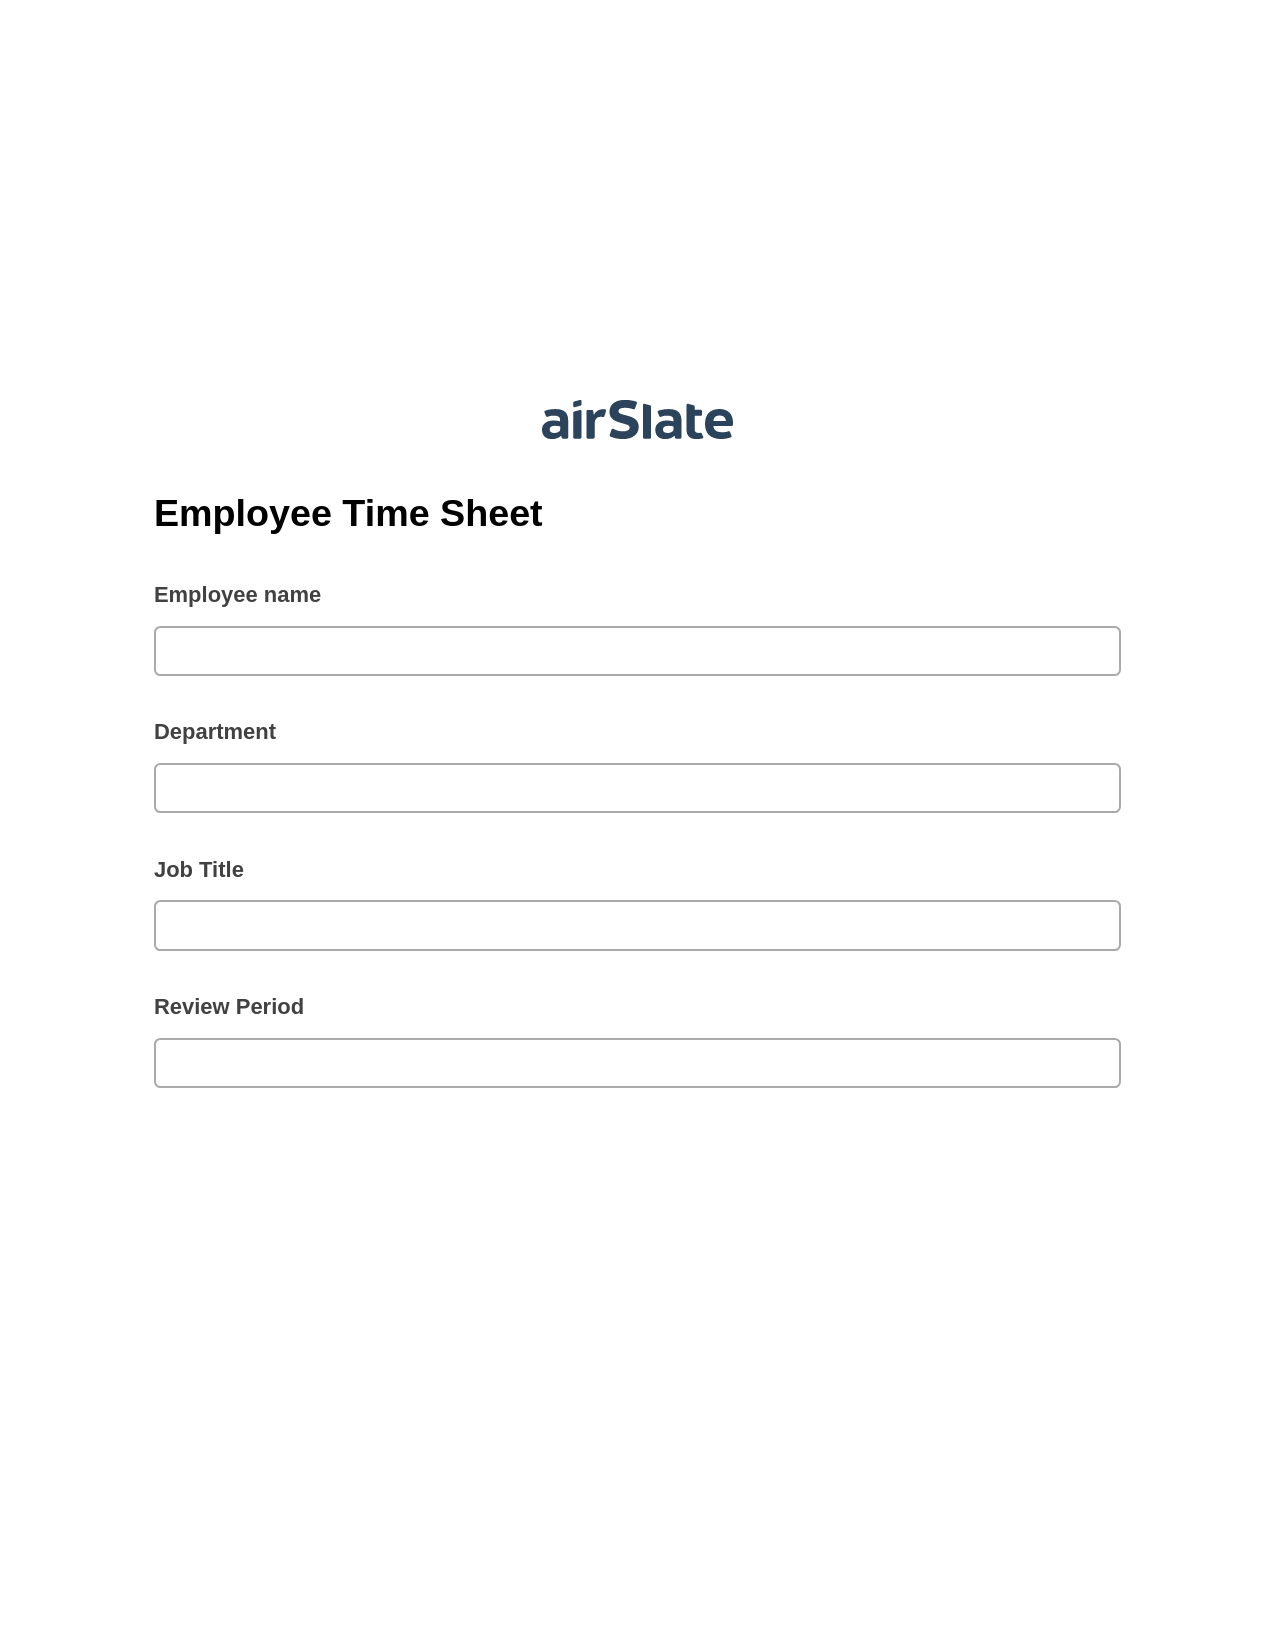 Multirole Employee Time Sheet Pre-fill from Excel Spreadsheet Bot, Create slate addon, Archive to OneDrive Bot